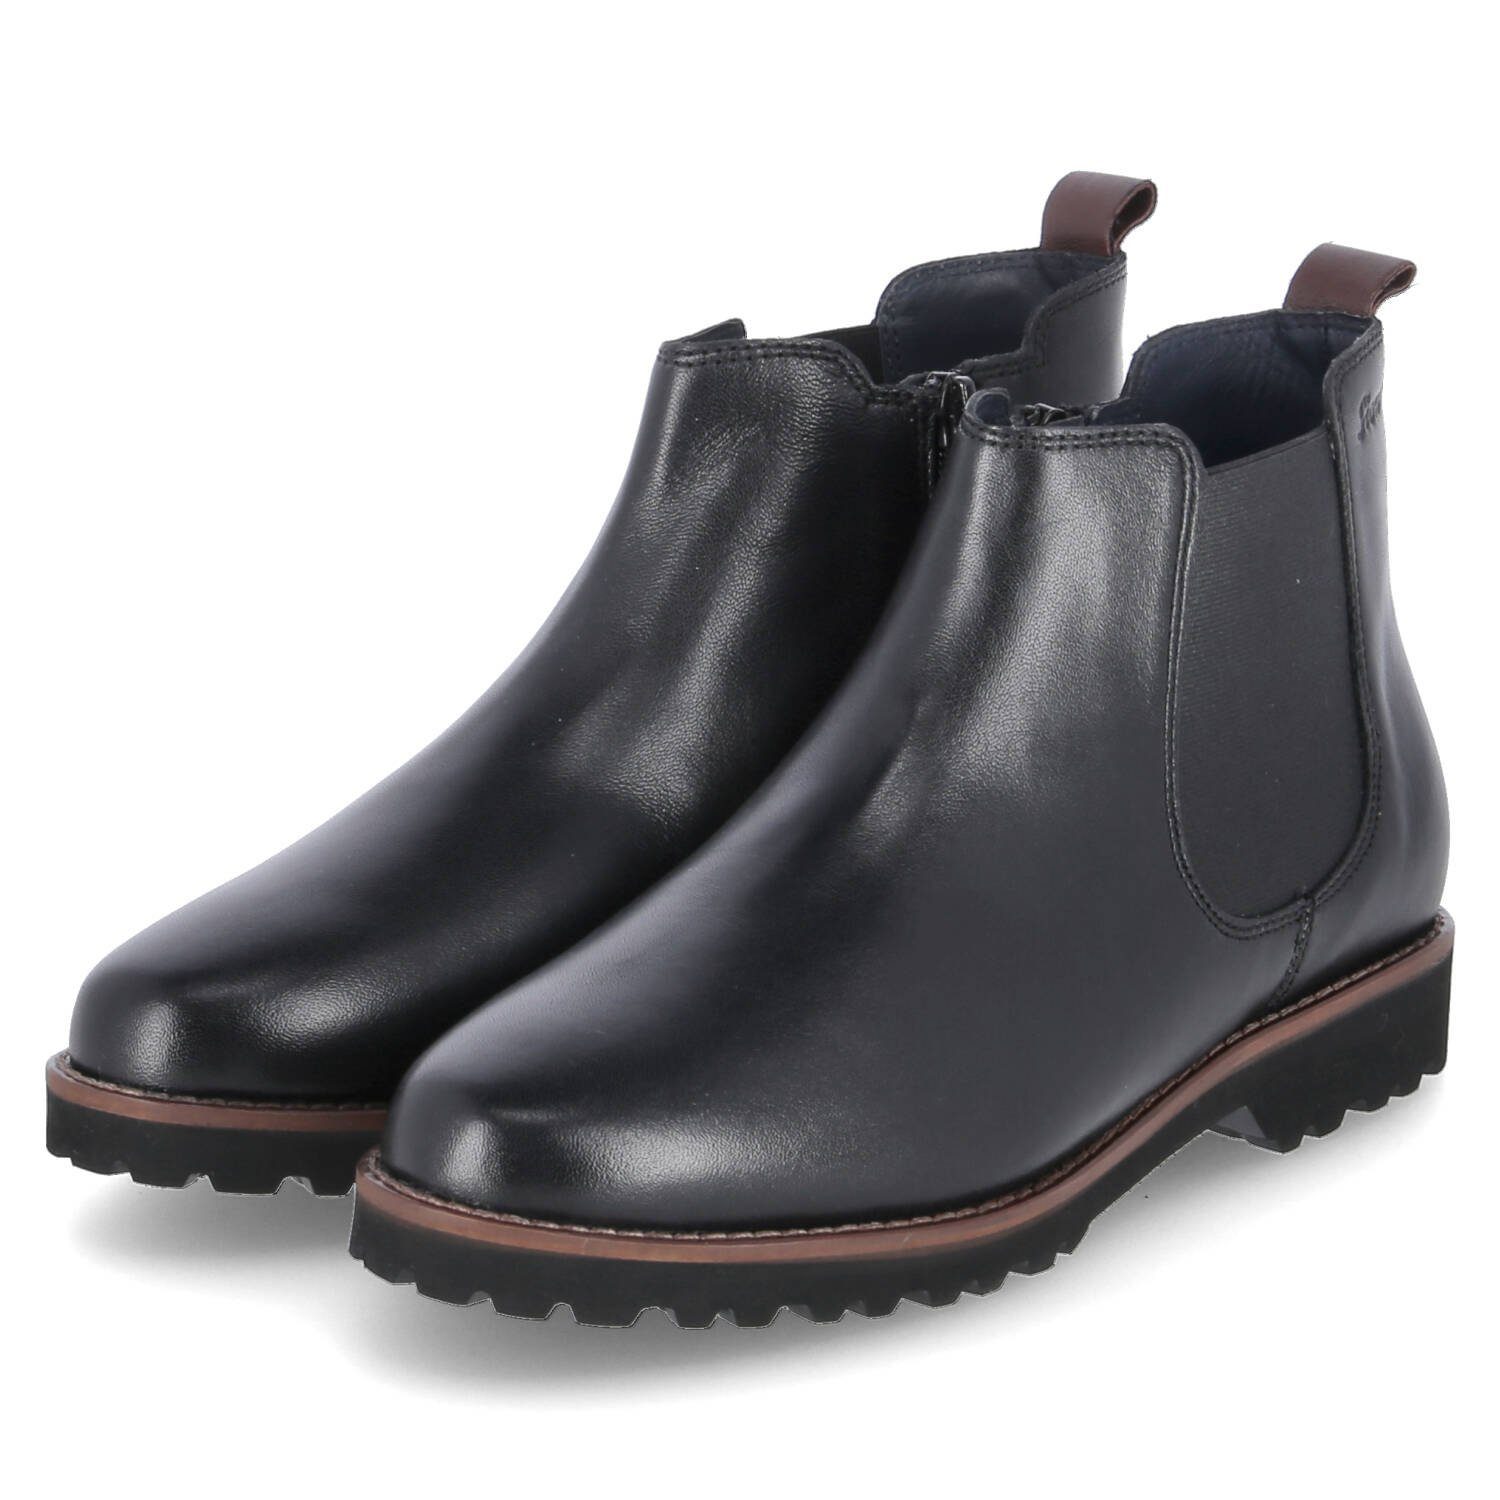 SIOUX Chelsea Boots MEREDITH-701-H Schnürstiefel